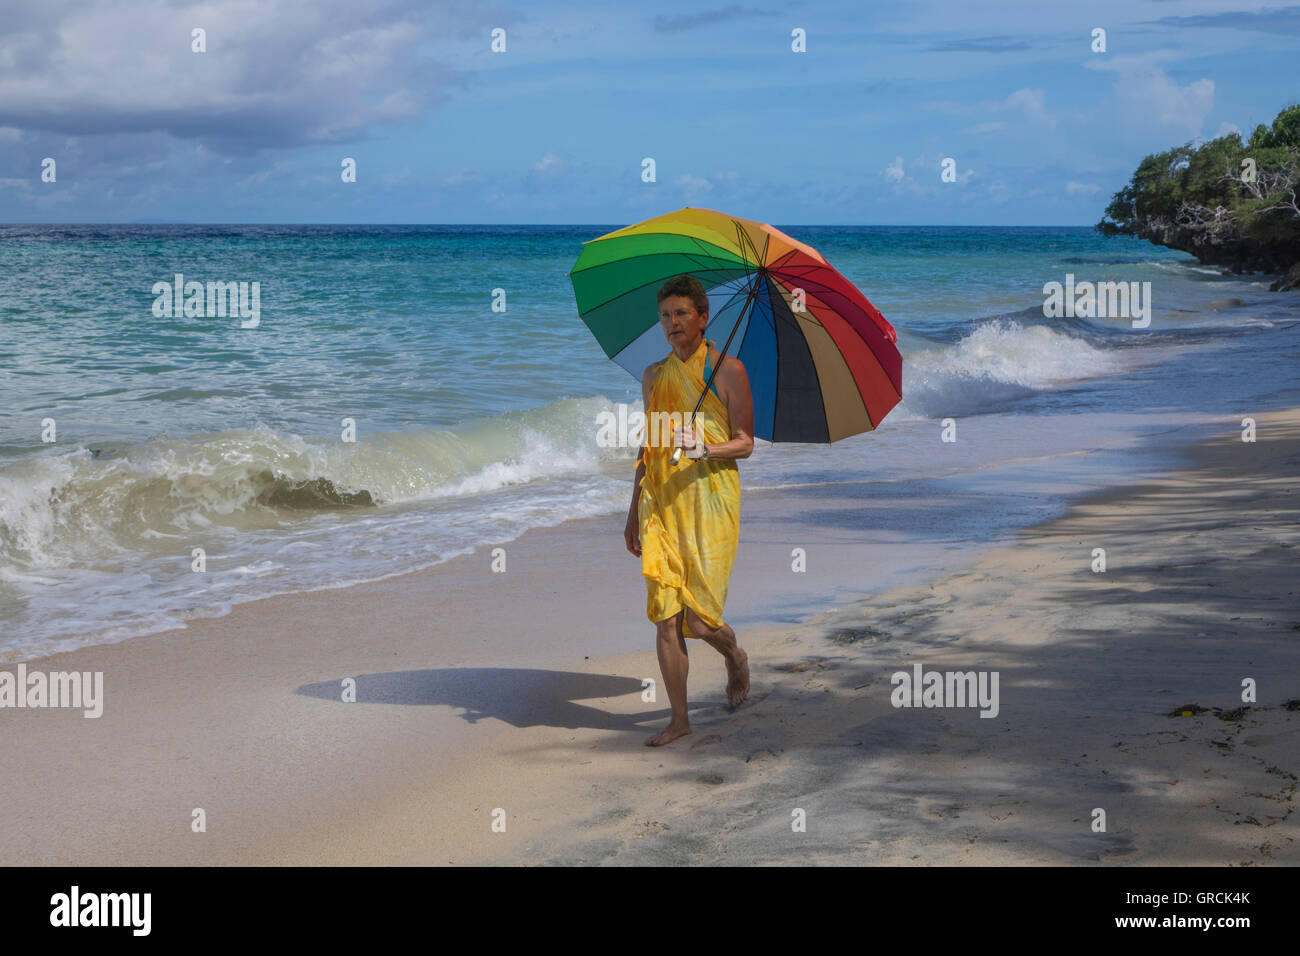 Woman In A Yellow Dress And A Rainbow Colored Parasol Walks Along A Sandy Beach. Stock Photo